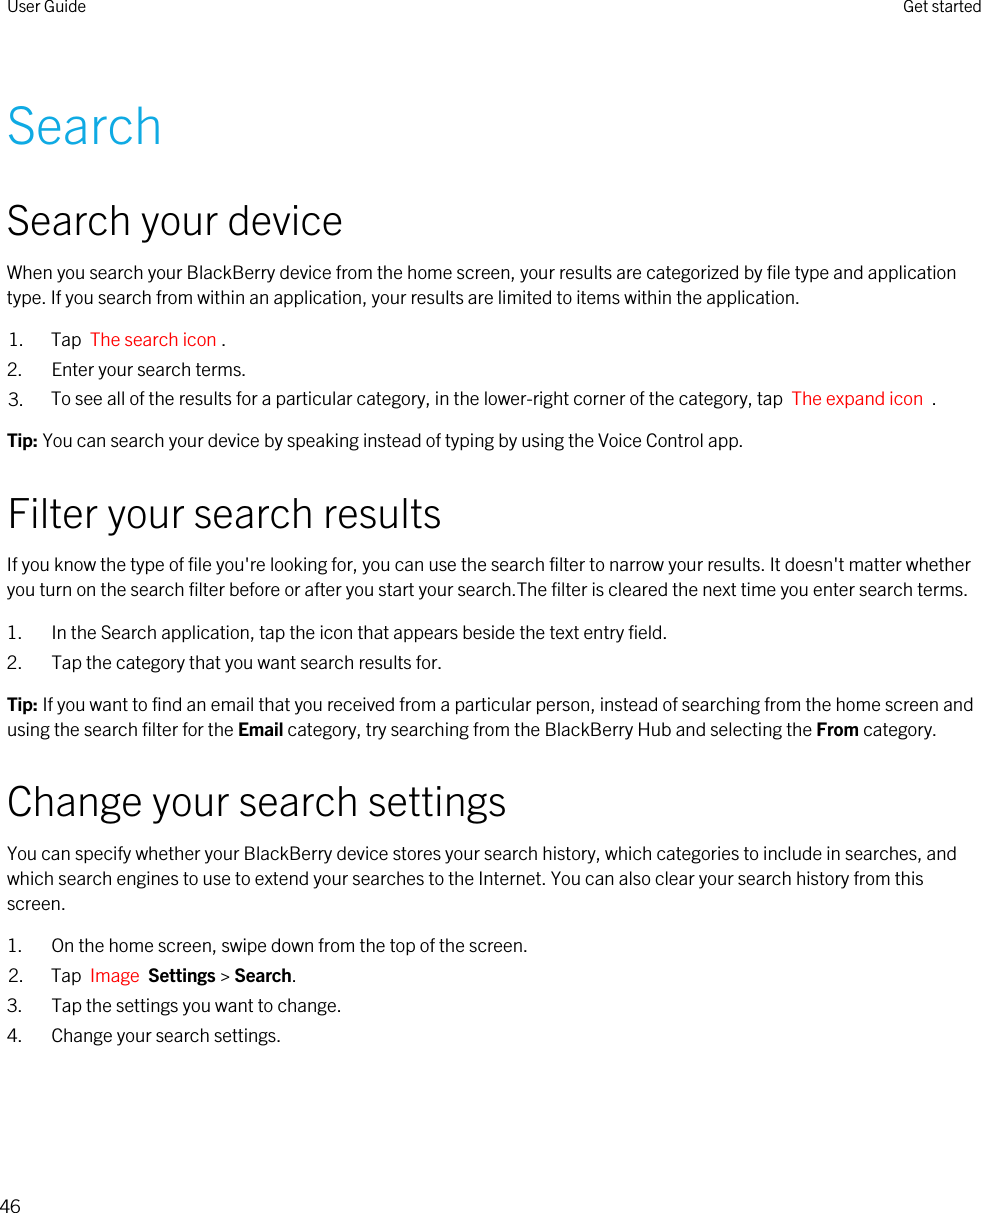 SearchSearch your deviceWhen you search your BlackBerry device from the home screen, your results are categorized by file type and application type. If you search from within an application, your results are limited to items within the application.1. Tap  The search icon .2. Enter your search terms.3. To see all of the results for a particular category, in the lower-right corner of the category, tap  The expand icon  .Tip: You can search your device by speaking instead of typing by using the Voice Control app.Filter your search resultsIf you know the type of file you&apos;re looking for, you can use the search filter to narrow your results. It doesn&apos;t matter whether you turn on the search filter before or after you start your search.The filter is cleared the next time you enter search terms.1. In the Search application, tap the icon that appears beside the text entry field.2. Tap the category that you want search results for.Tip: If you want to find an email that you received from a particular person, instead of searching from the home screen and using the search filter for the Email category, try searching from the BlackBerry Hub and selecting the From category.Change your search settingsYou can specify whether your BlackBerry device stores your search history, which categories to include in searches, and which search engines to use to extend your searches to the Internet. You can also clear your search history from this screen.1. On the home screen, swipe down from the top of the screen.2. Tap  Image  Settings &gt; Search.3. Tap the settings you want to change.4. Change your search settings.User Guide Get started46